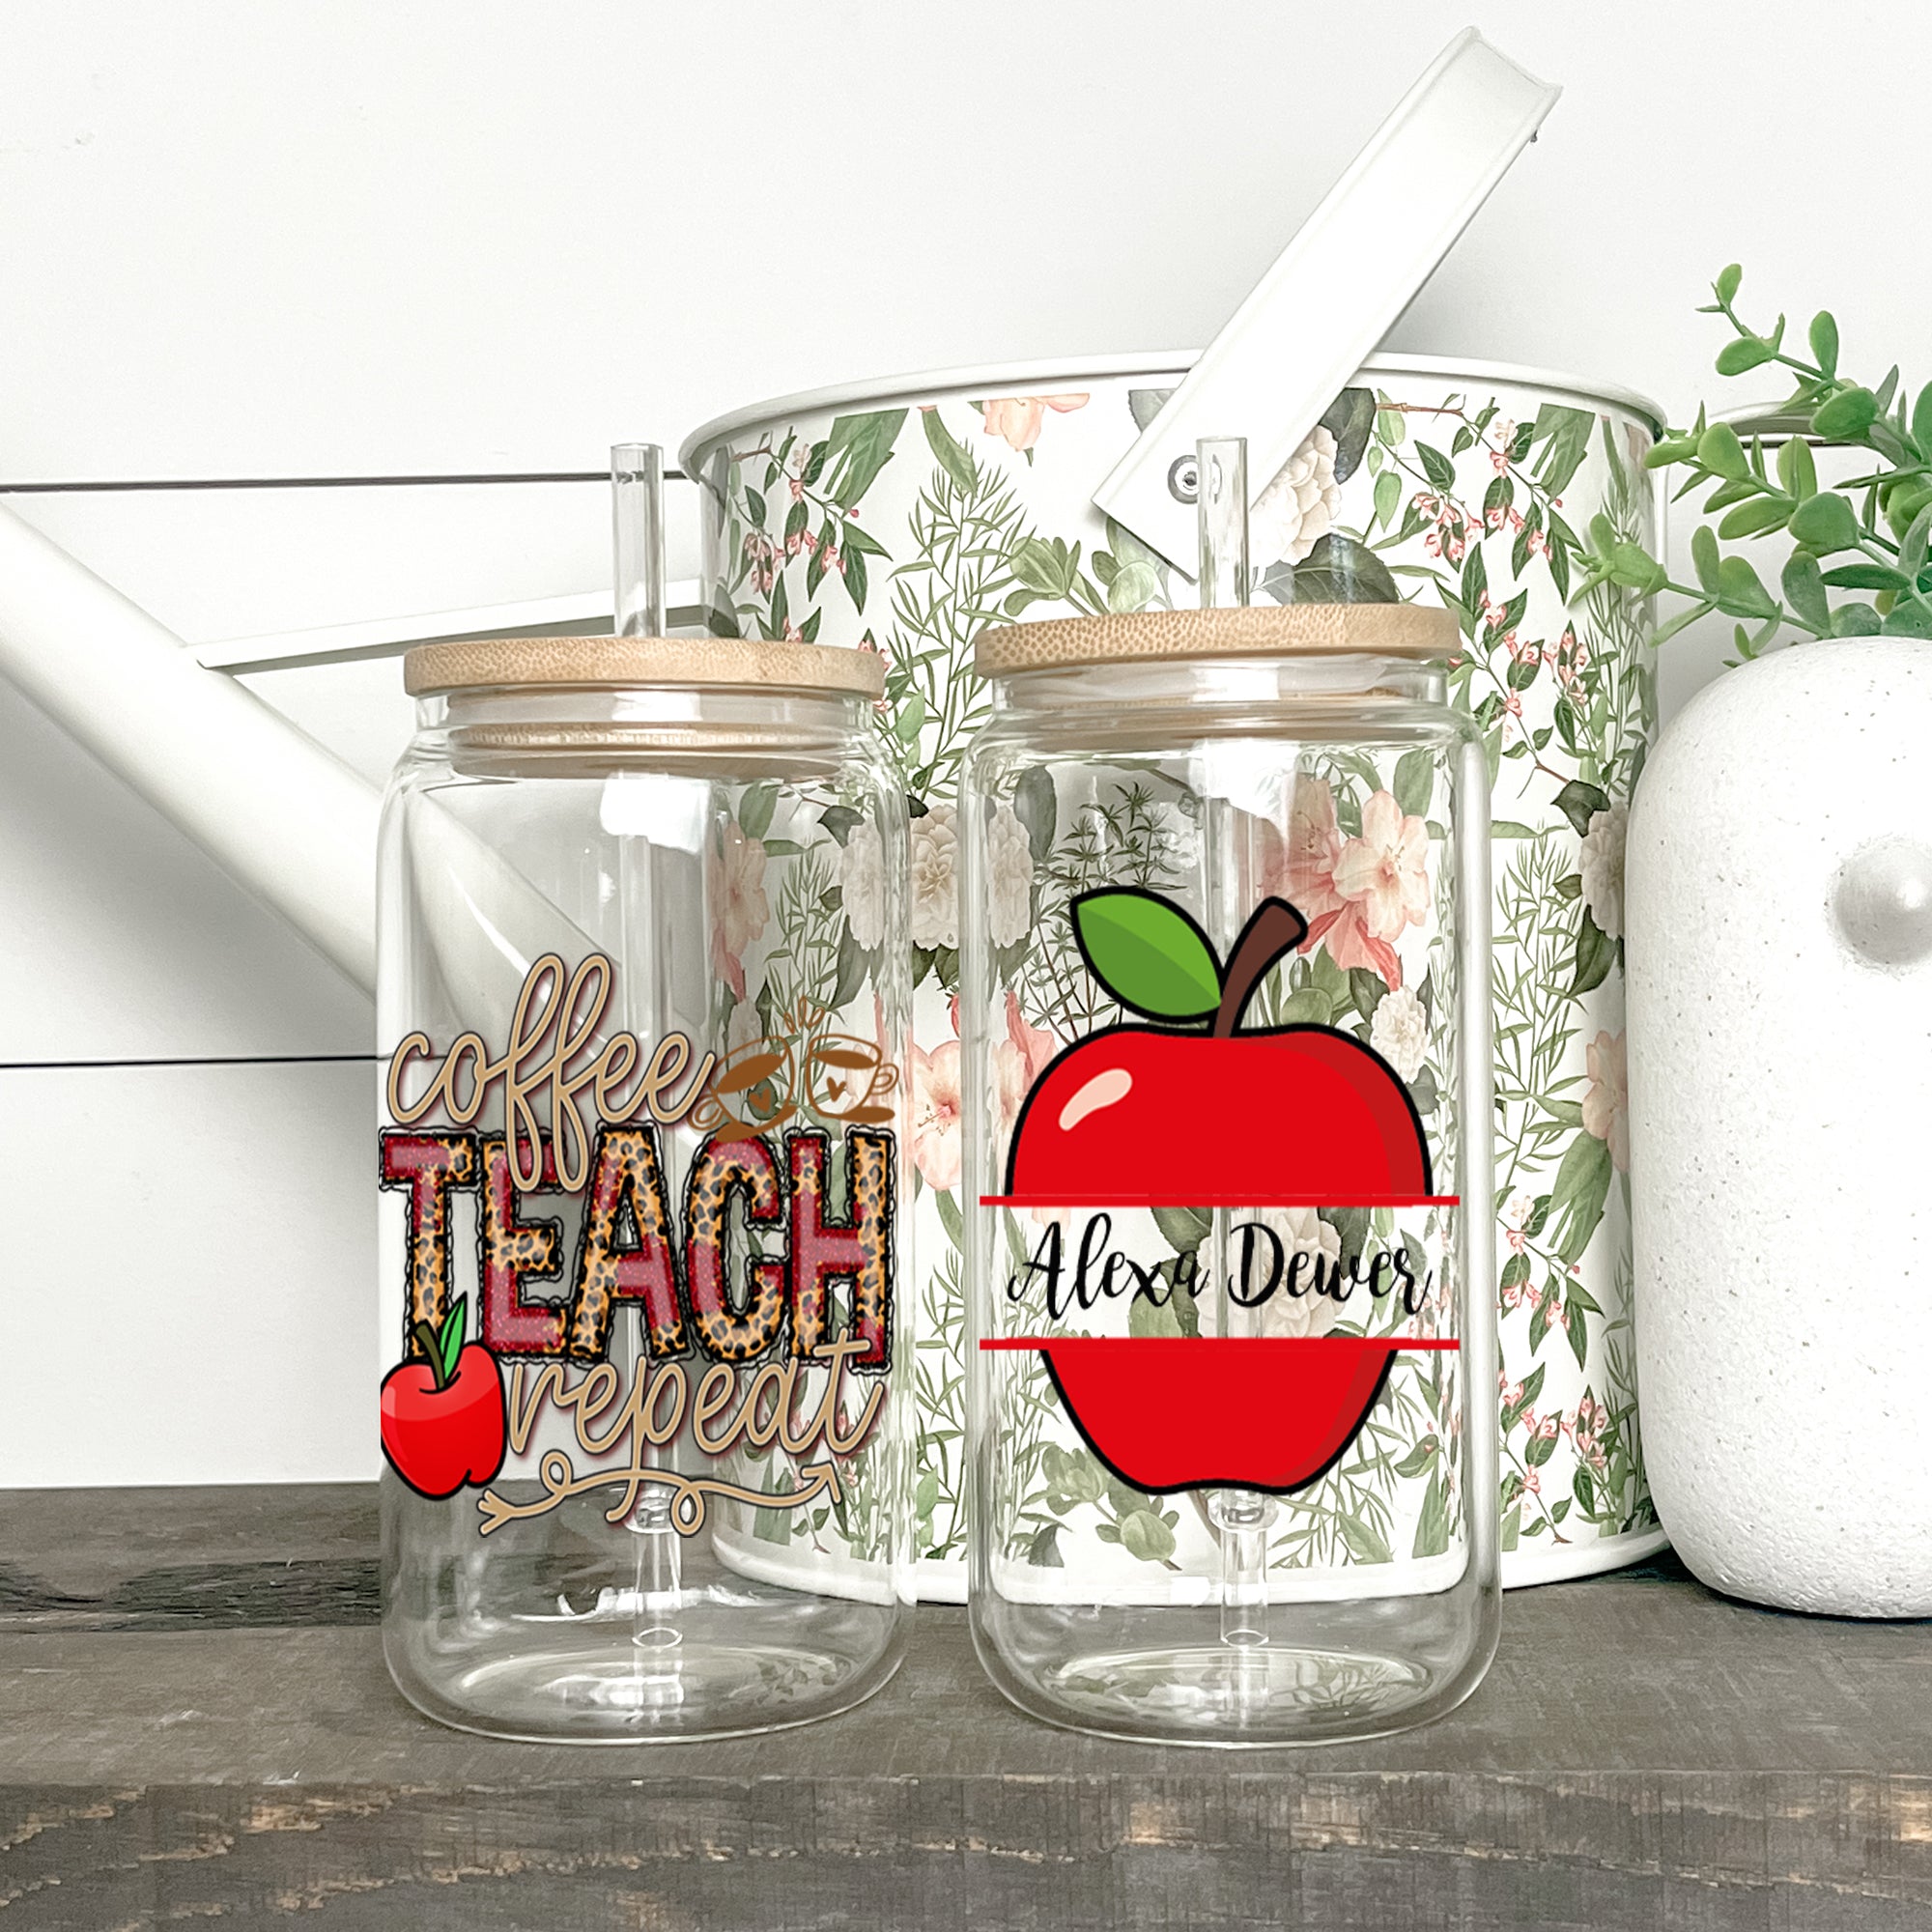 Coffee Teach Repeat - Custom Name - Personalized Glass Bottle, Frosted Bottle, Gift For Teacher, Back To School